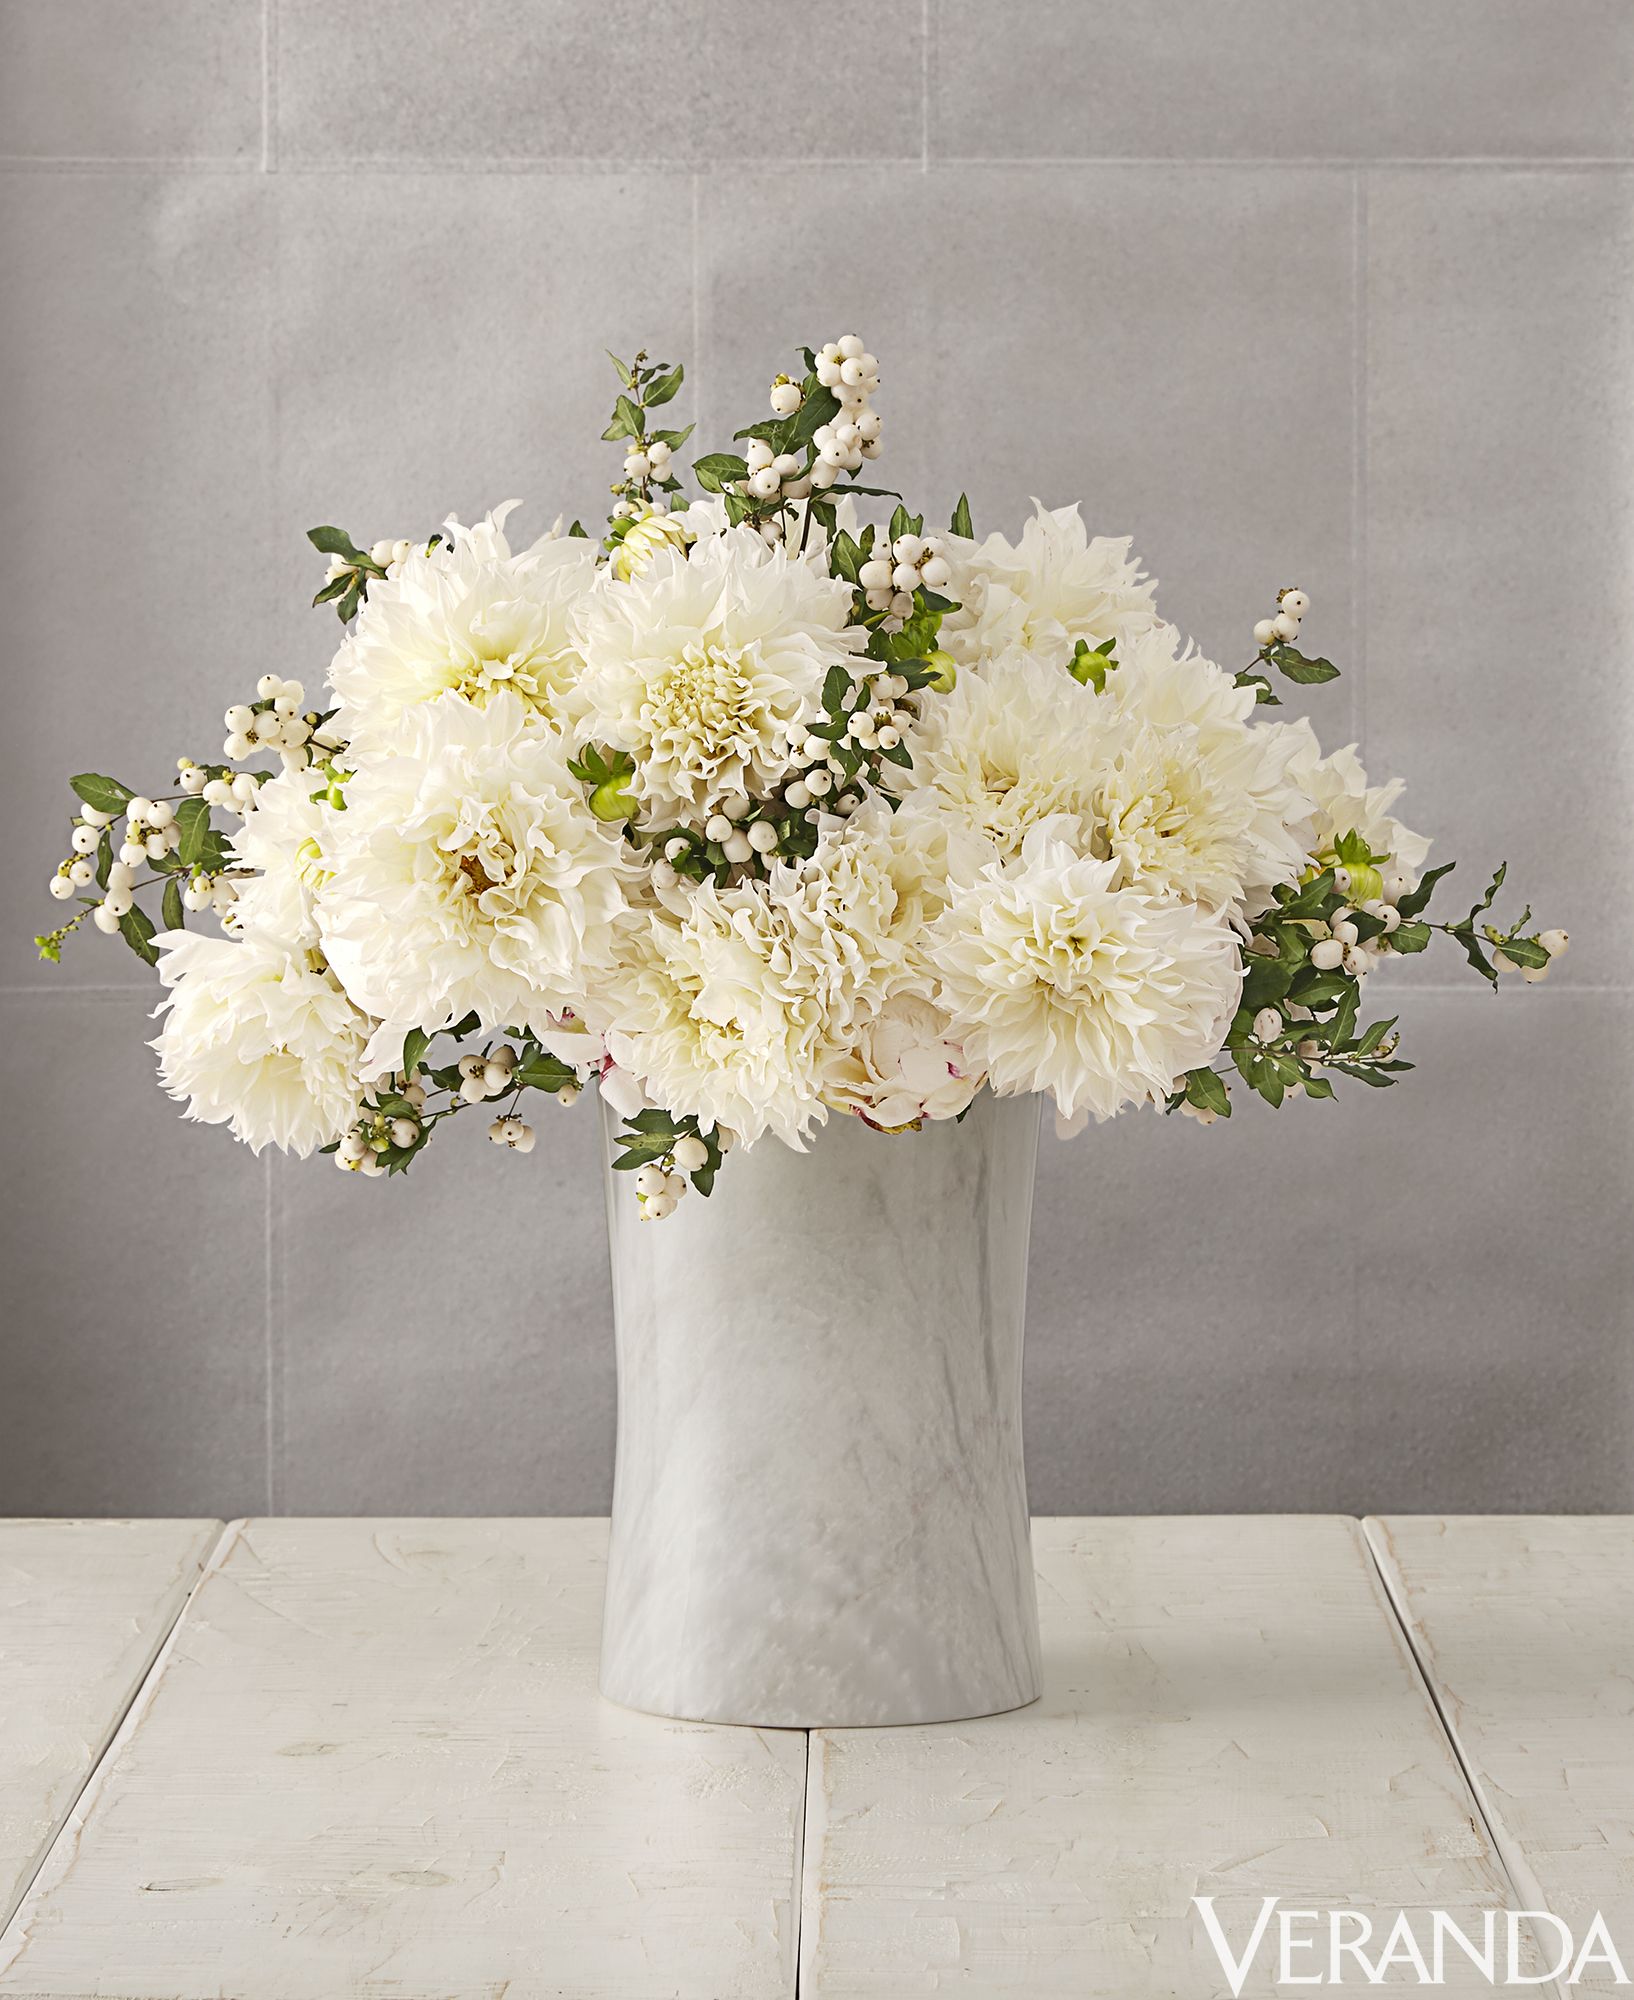 How to Easily Create Beautiful Winter Floral Arrangements - WM Design House